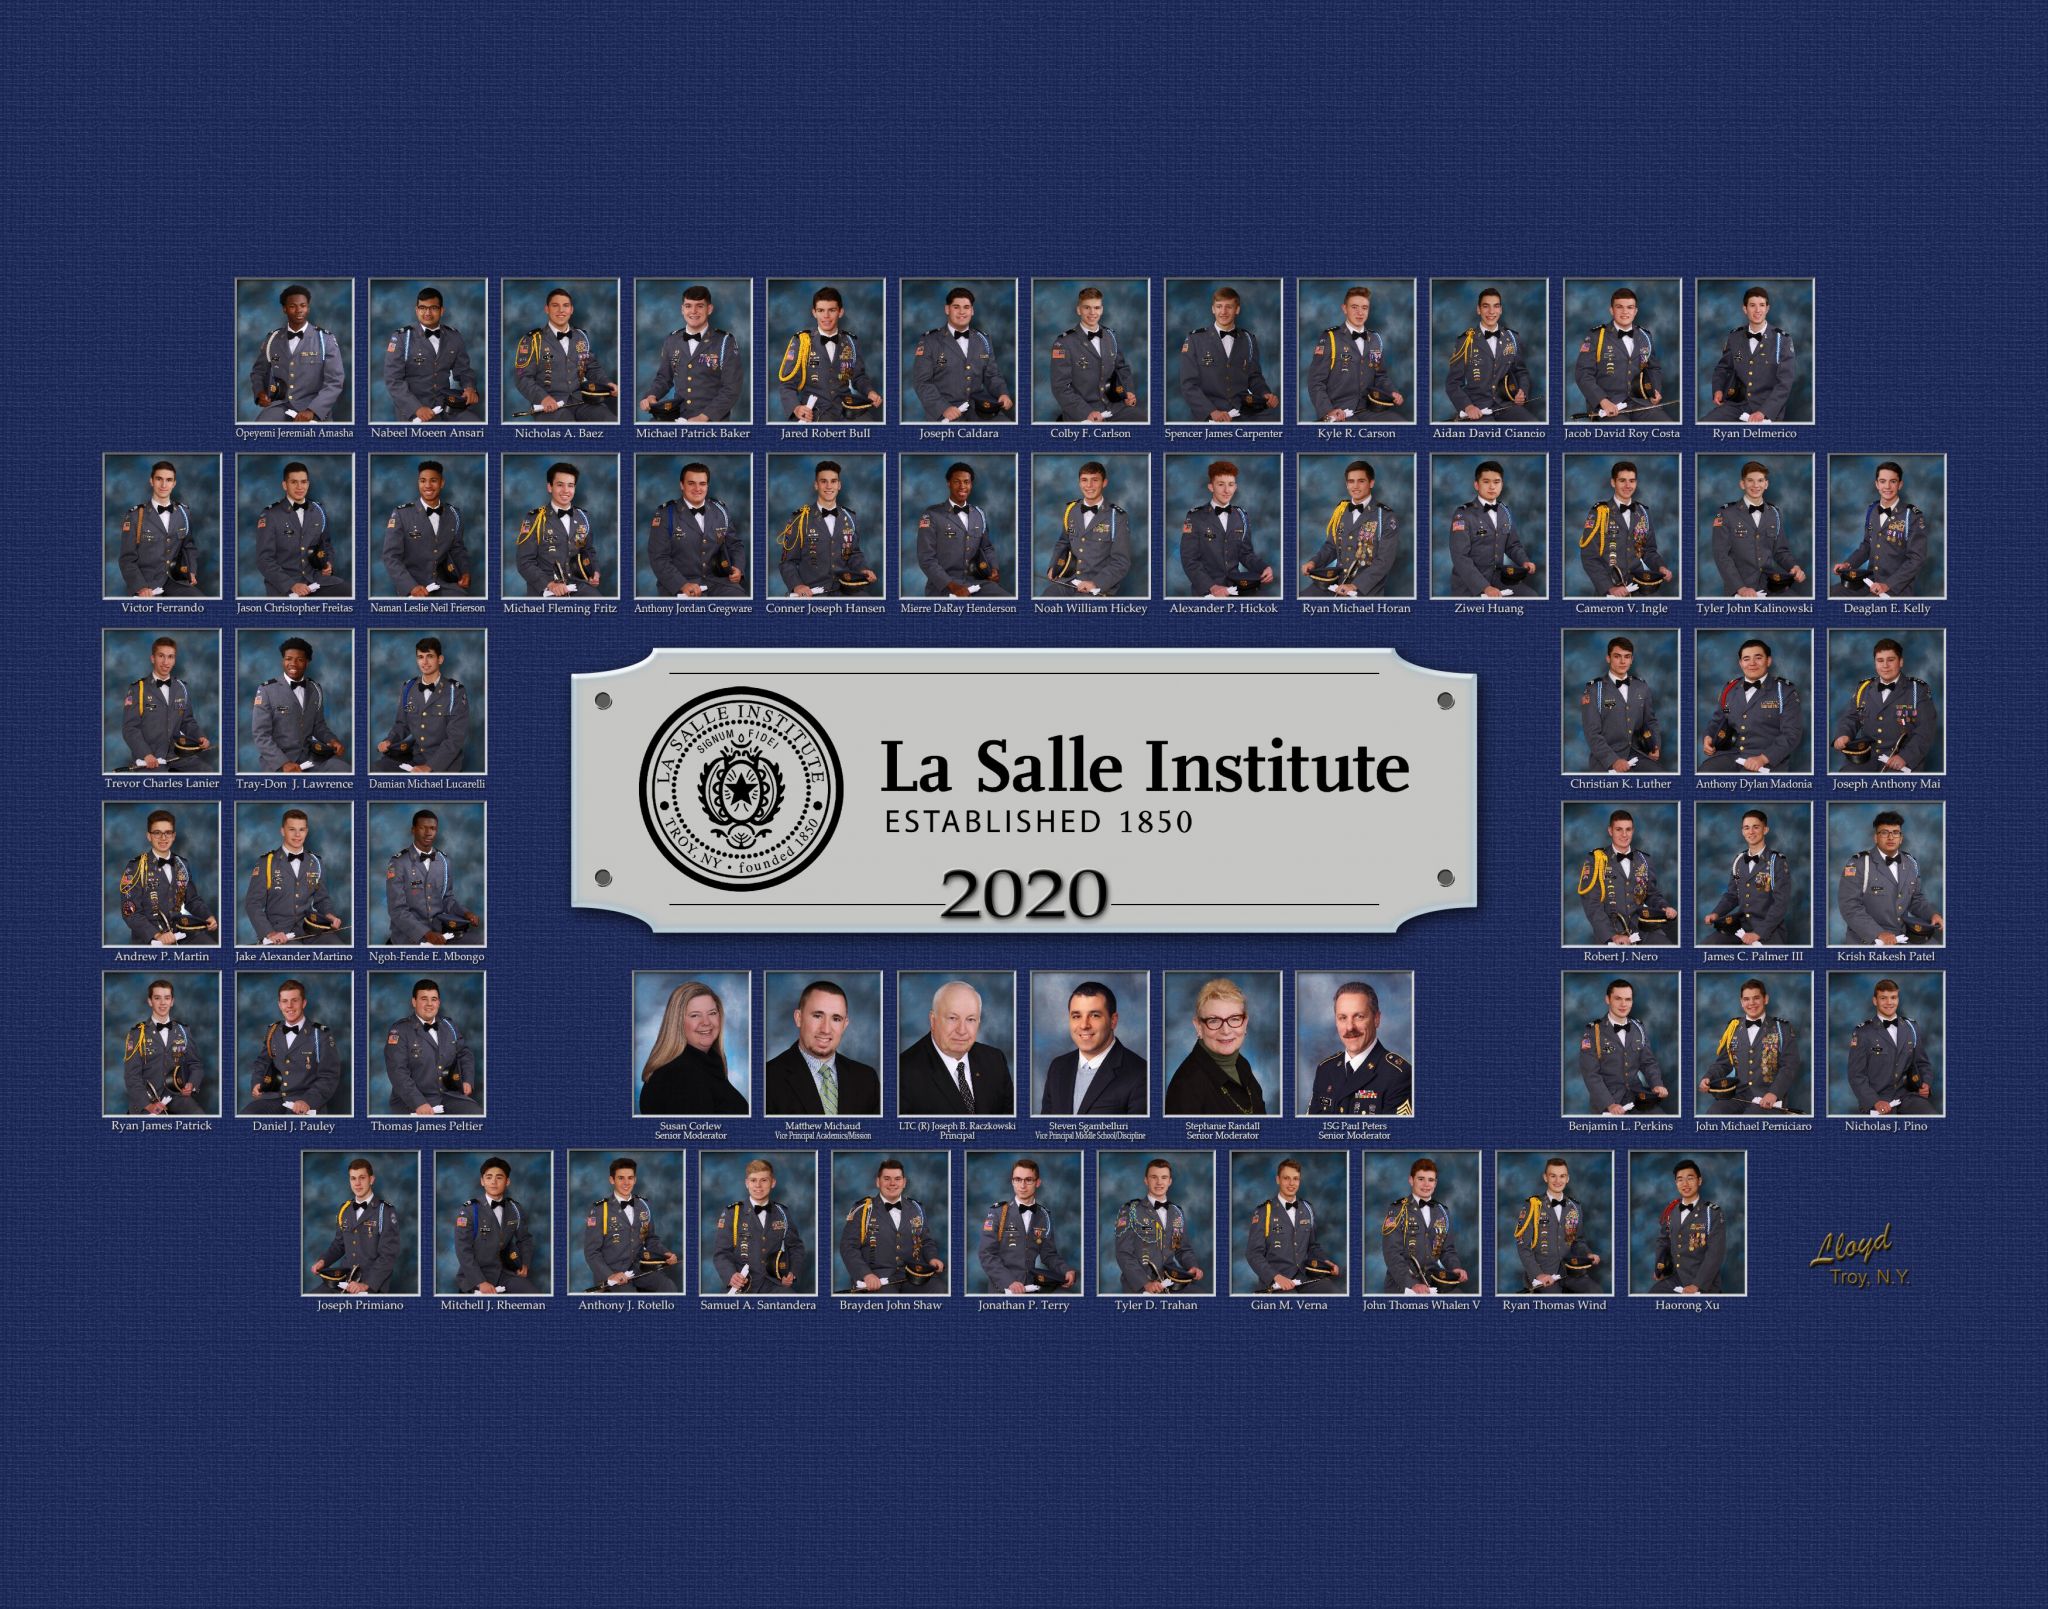 With social distancing, La Salle Institute gathers for recognition